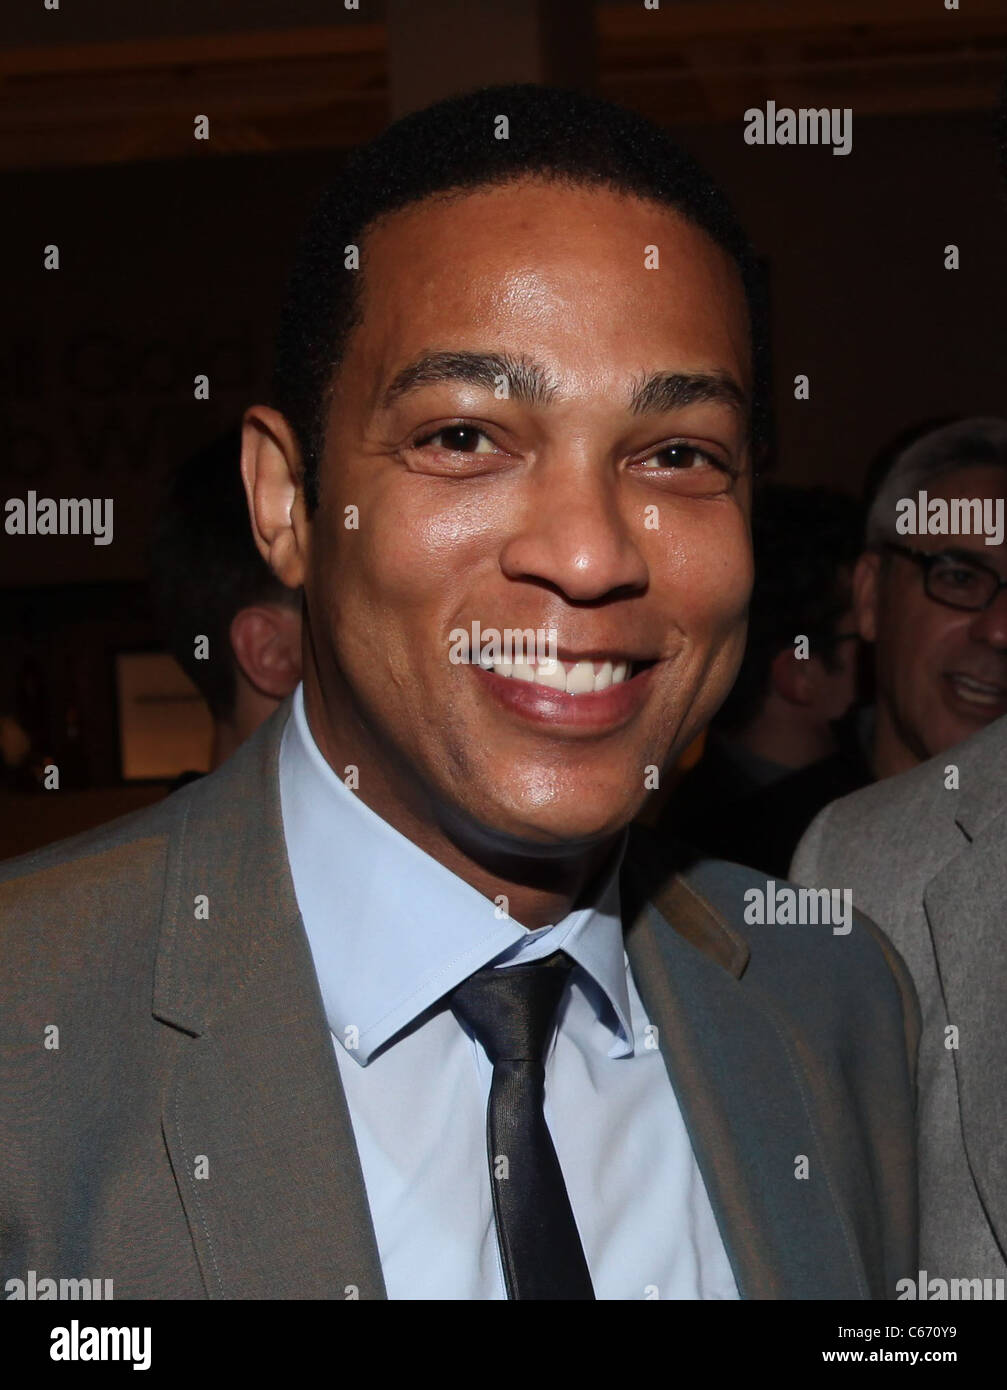 Newly out CNN achor, Don Lemon in attendance for NLGJA's 16th Annual Headlines and Headliners Benefit, Mitchell Gold + Bob Williams SoHo Store, New York, NY March 24, 2011. Photo By: Michael Williams/Everett Collection Stock Photo